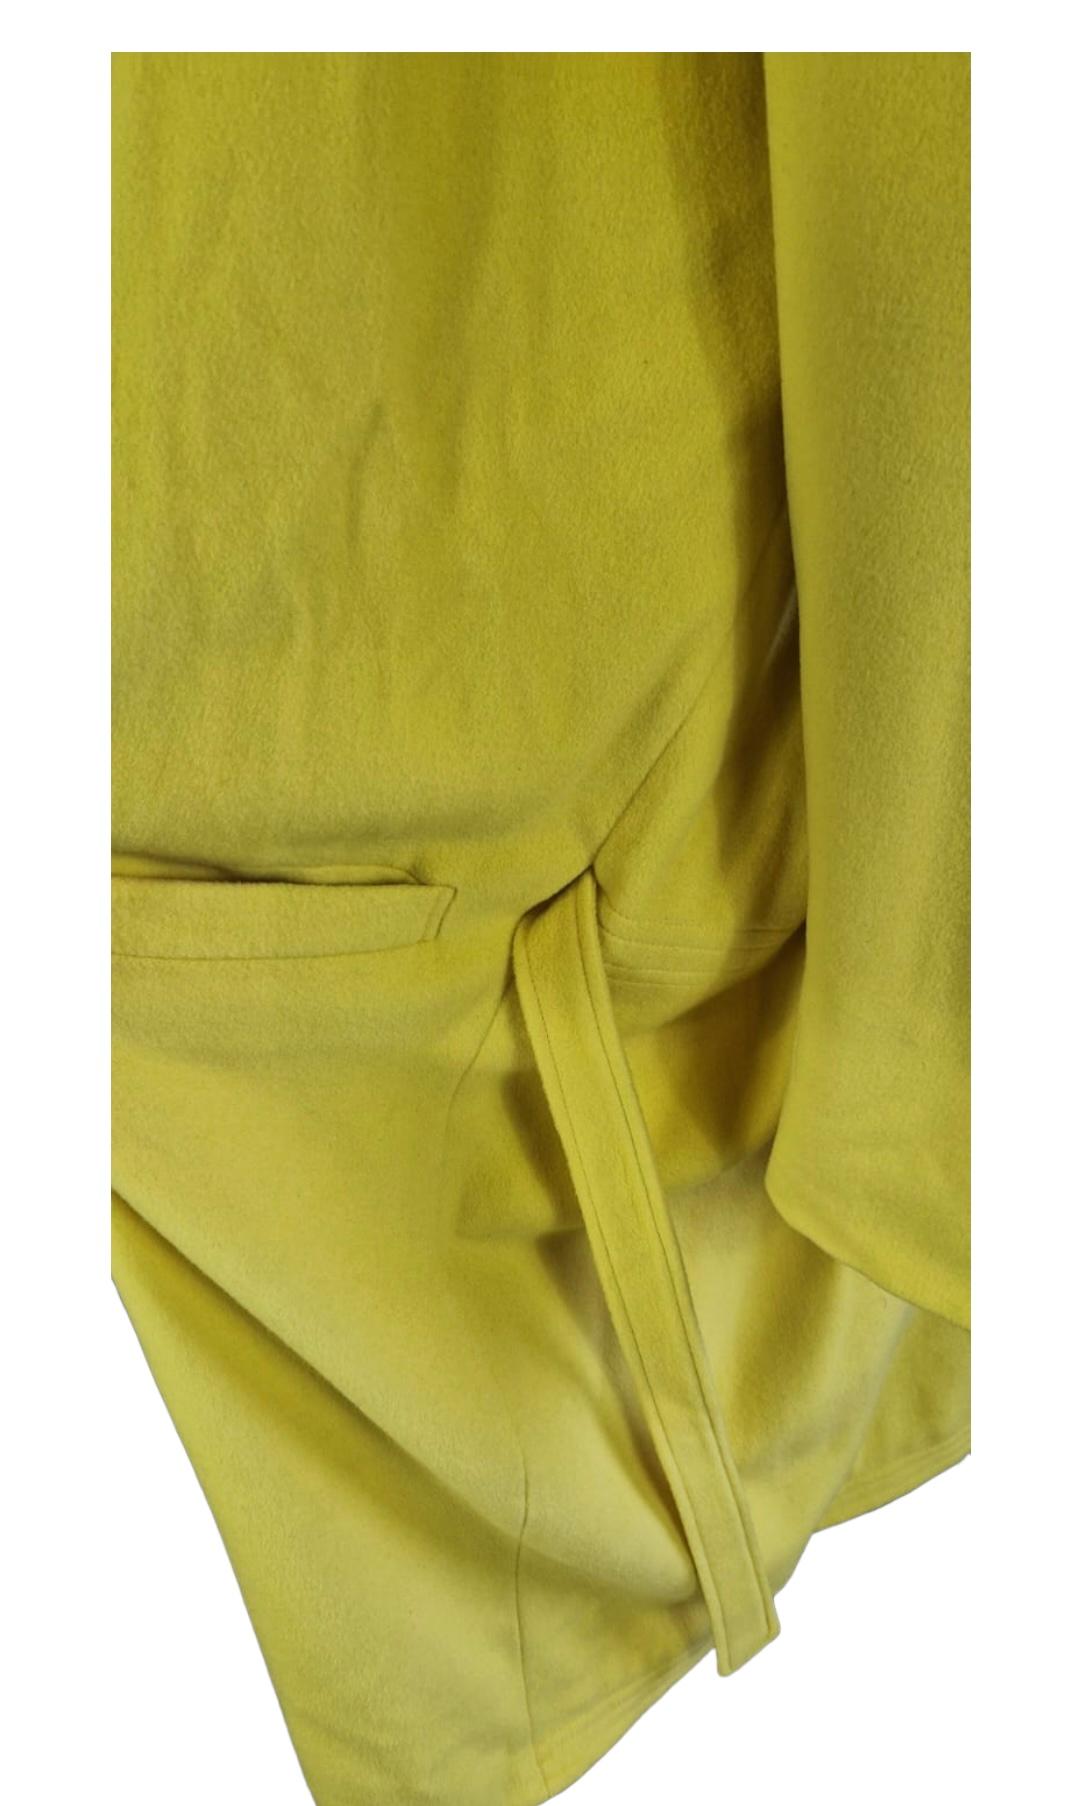 Vintage Versace coat in yellow wool, indicated size 42 but very over fit. 
Waist belt not visible from the outside because it passes internally between the coat and the inner lining. Mixed nylon and cupro interior always yellow with embroidered